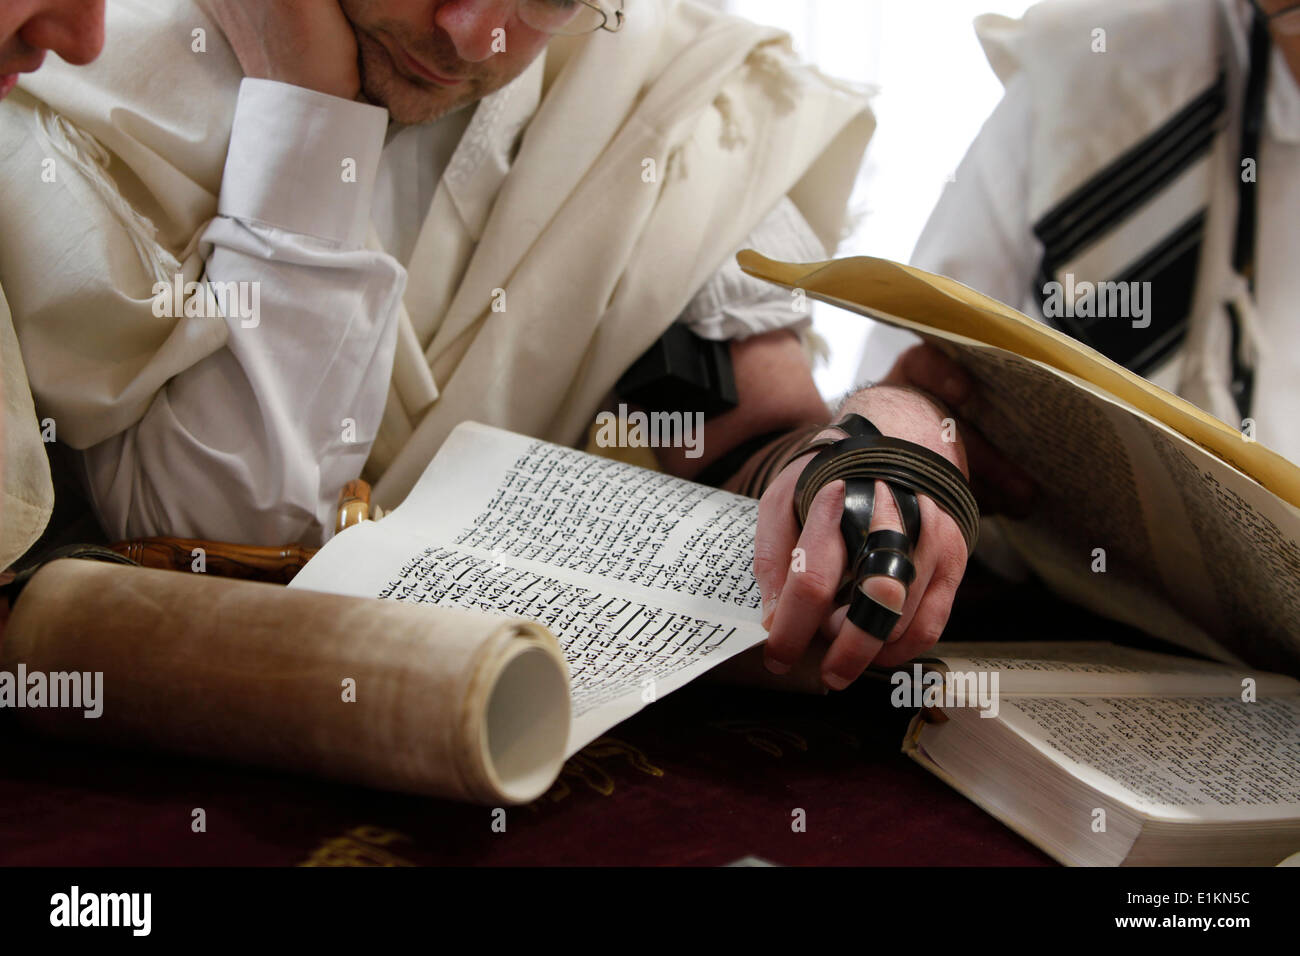 Purim celebration in a synagogue : reading the book of Esther Stock Photo